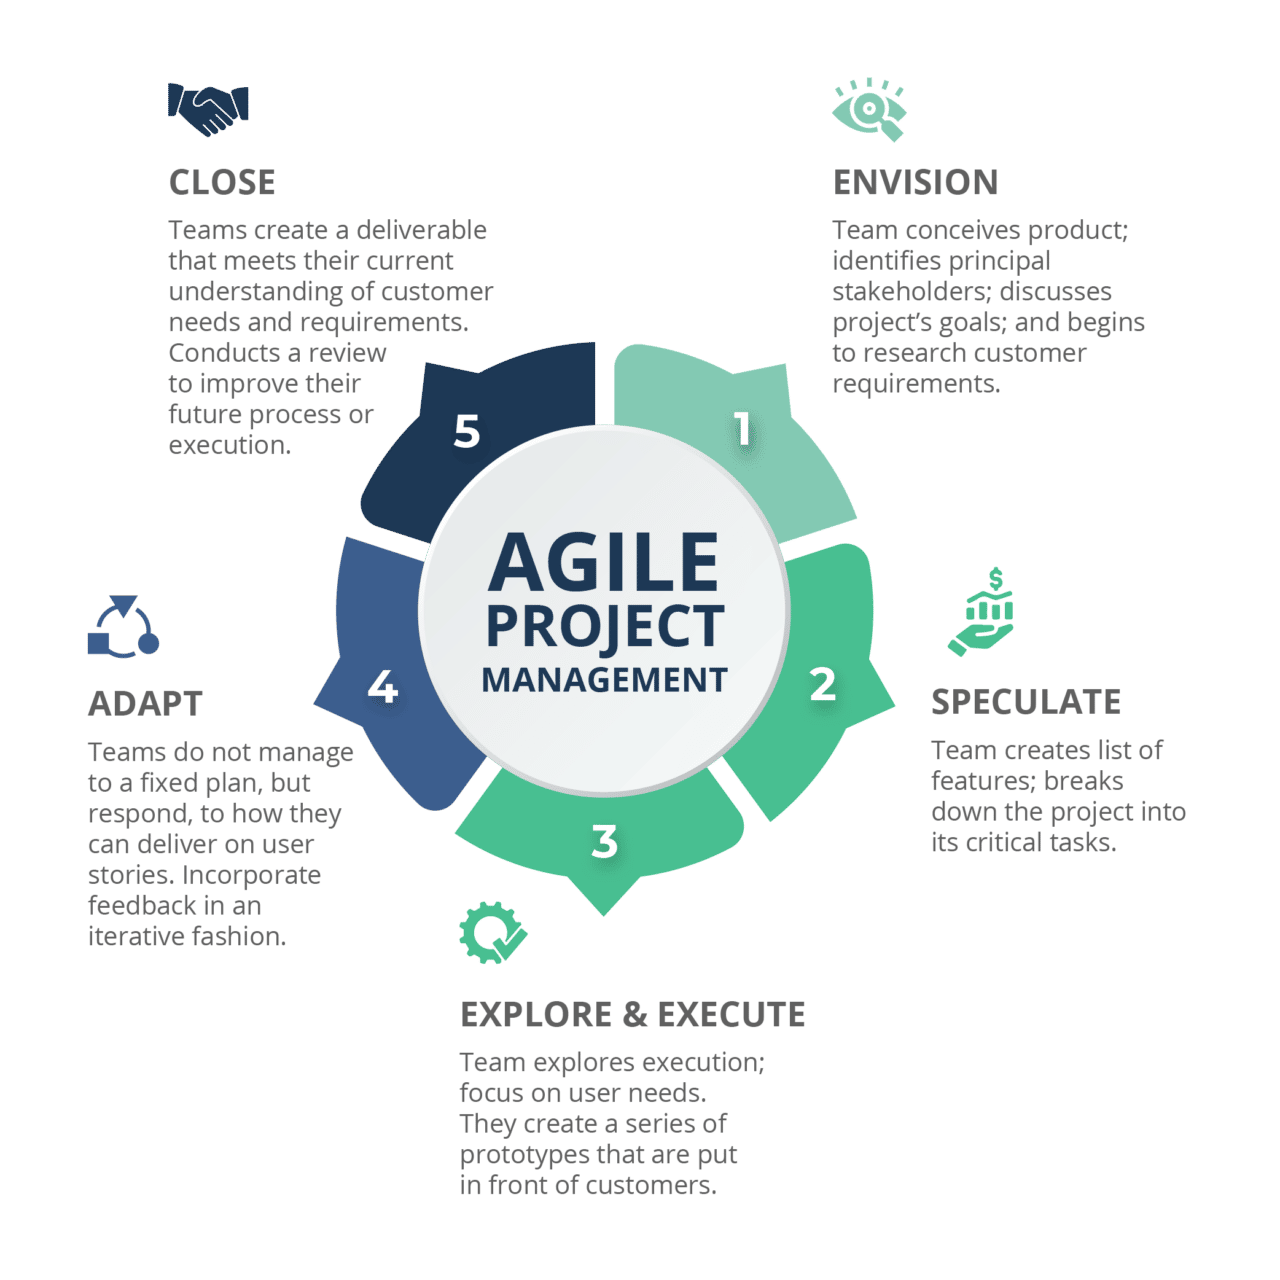 agile project management thesis topics